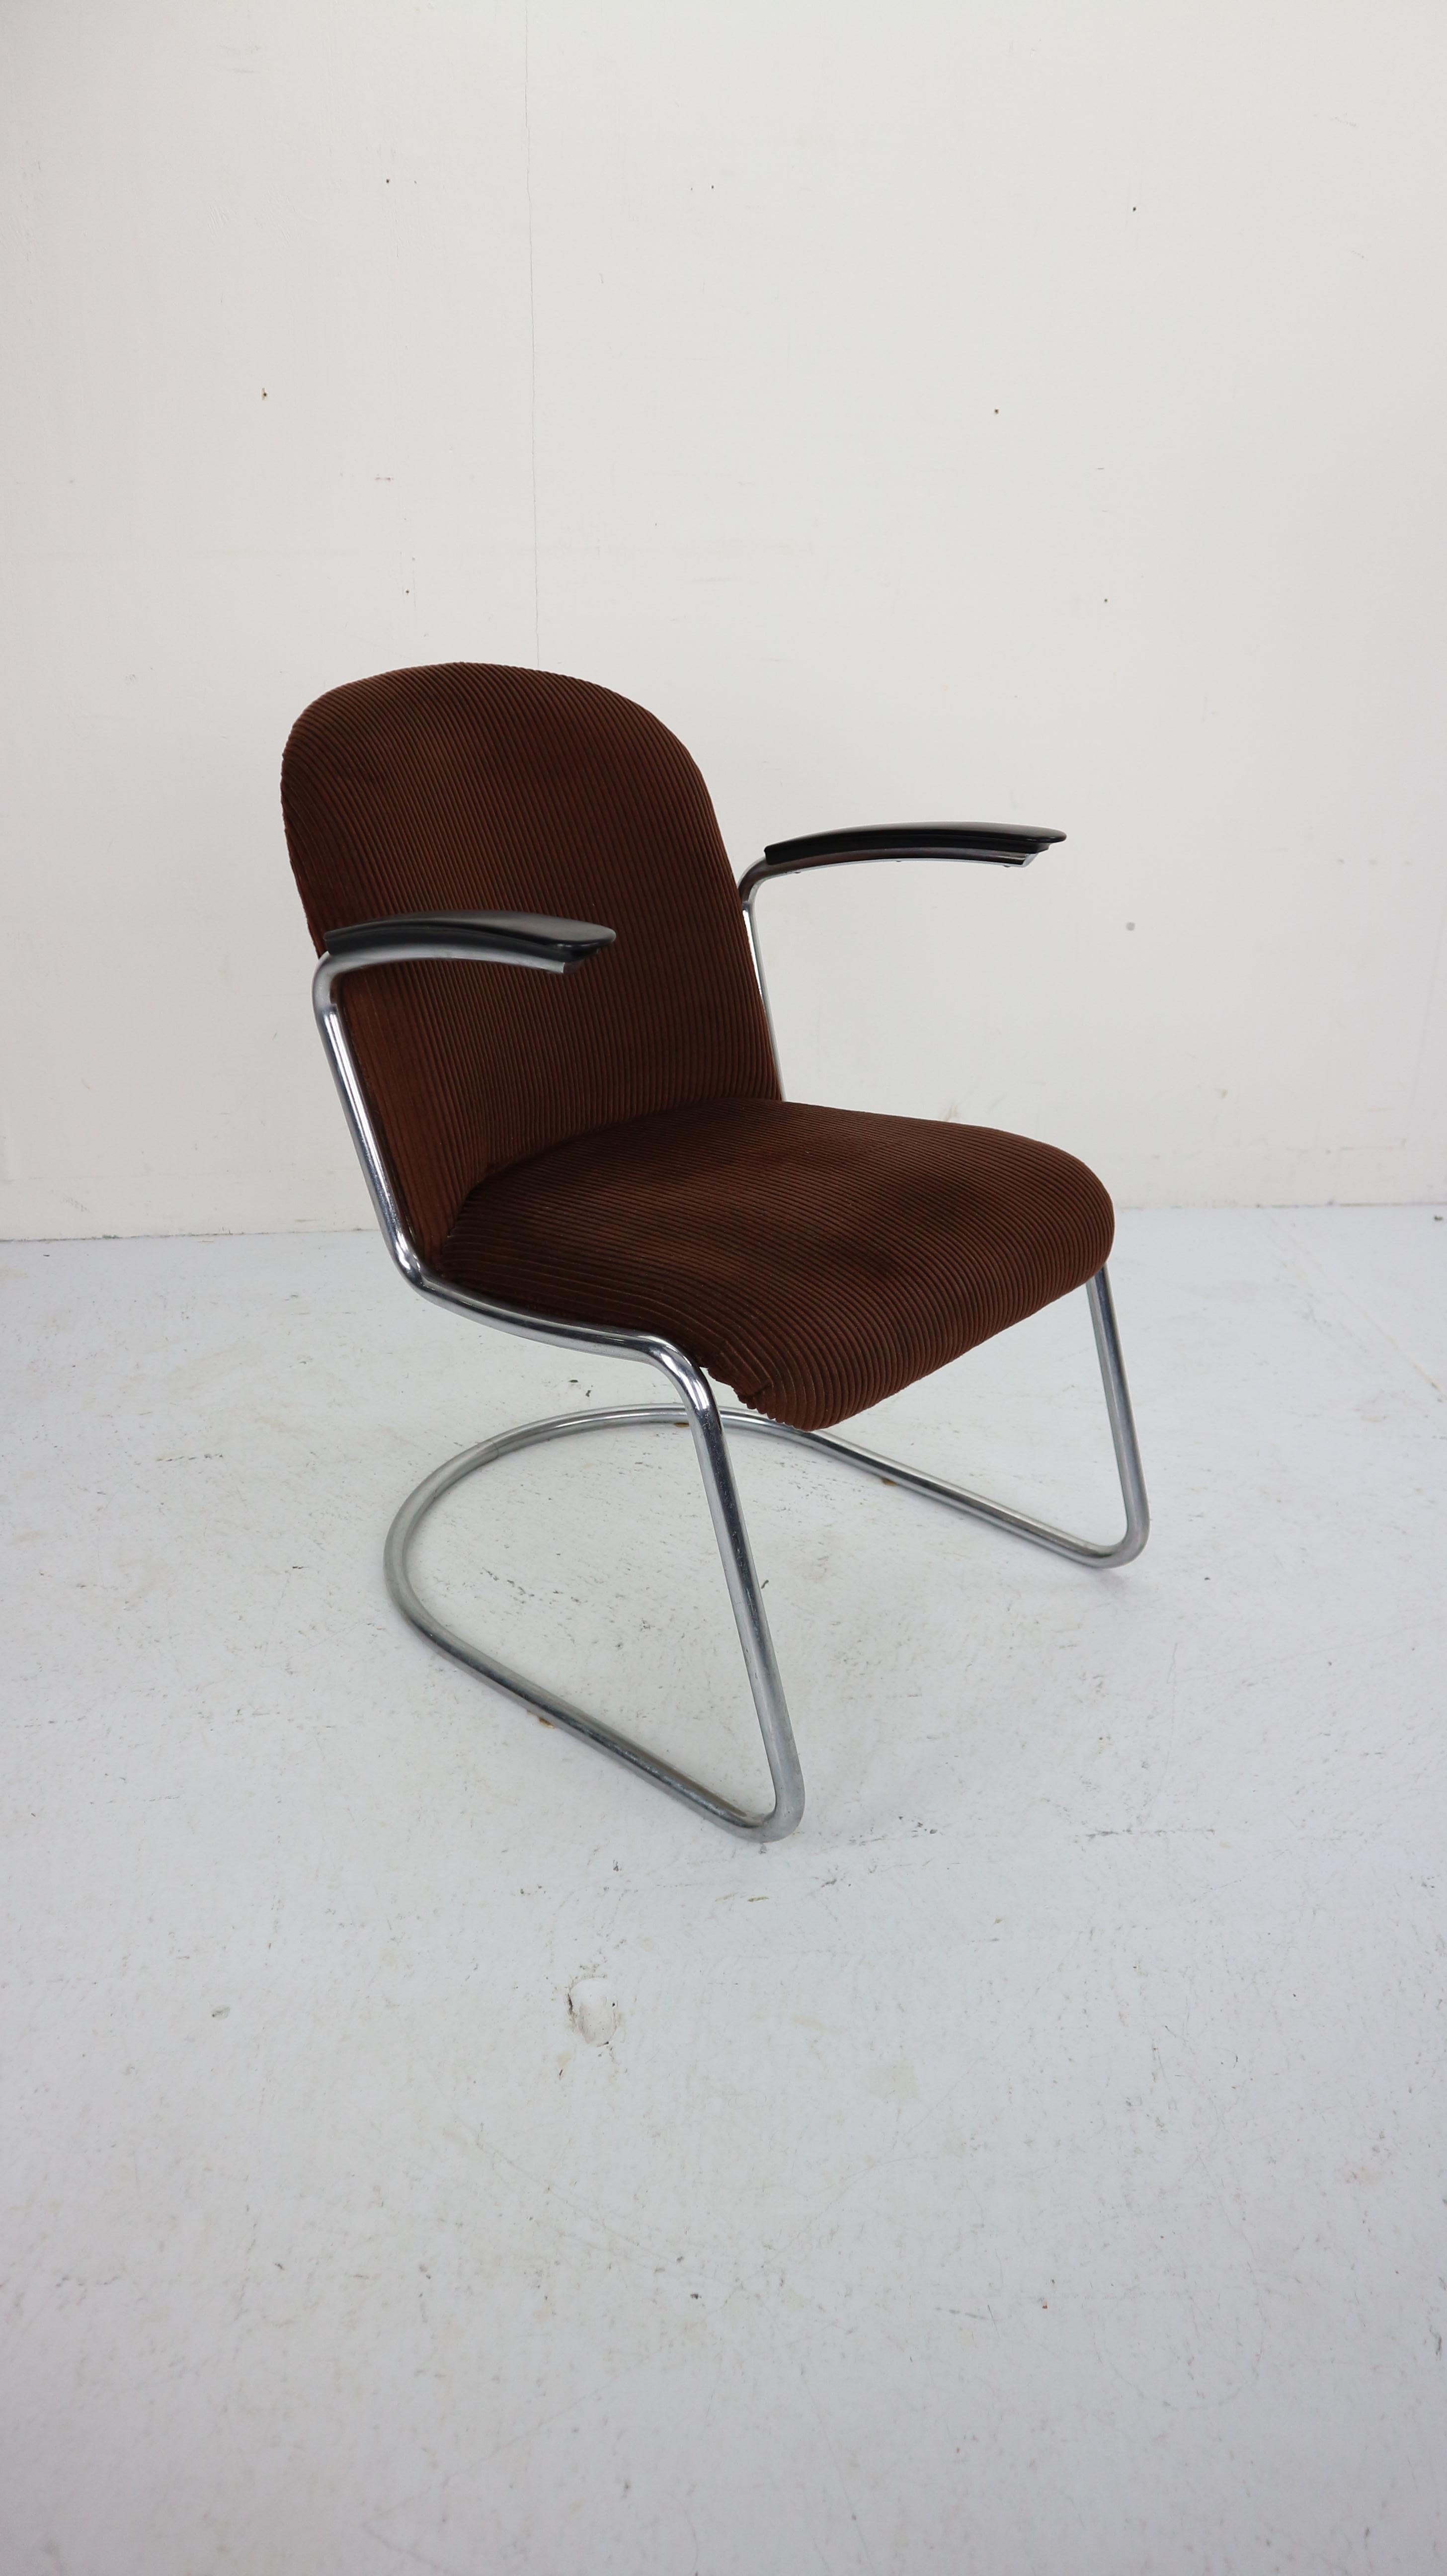 The easy armchair designed by W.H. Gipsen for Gipsen Culemborg manufacture in 1953, Netherlands.
Model number- 413.
Chrome version, very comfortable original easy chair with original dark brown color upholstery including the original version of